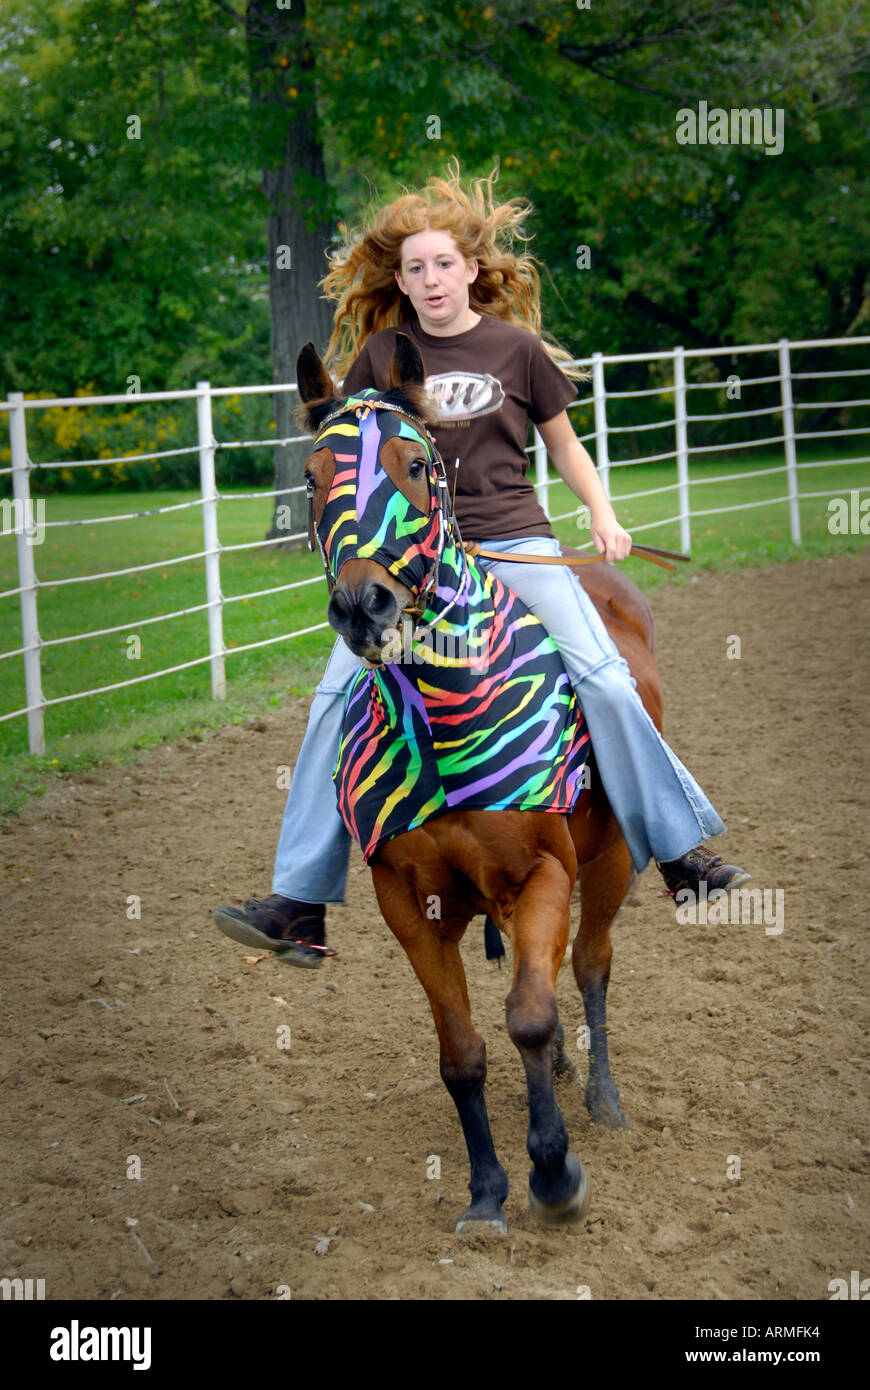 High school female student riding bareback without a saddle competes in equestrian event Stock Photo